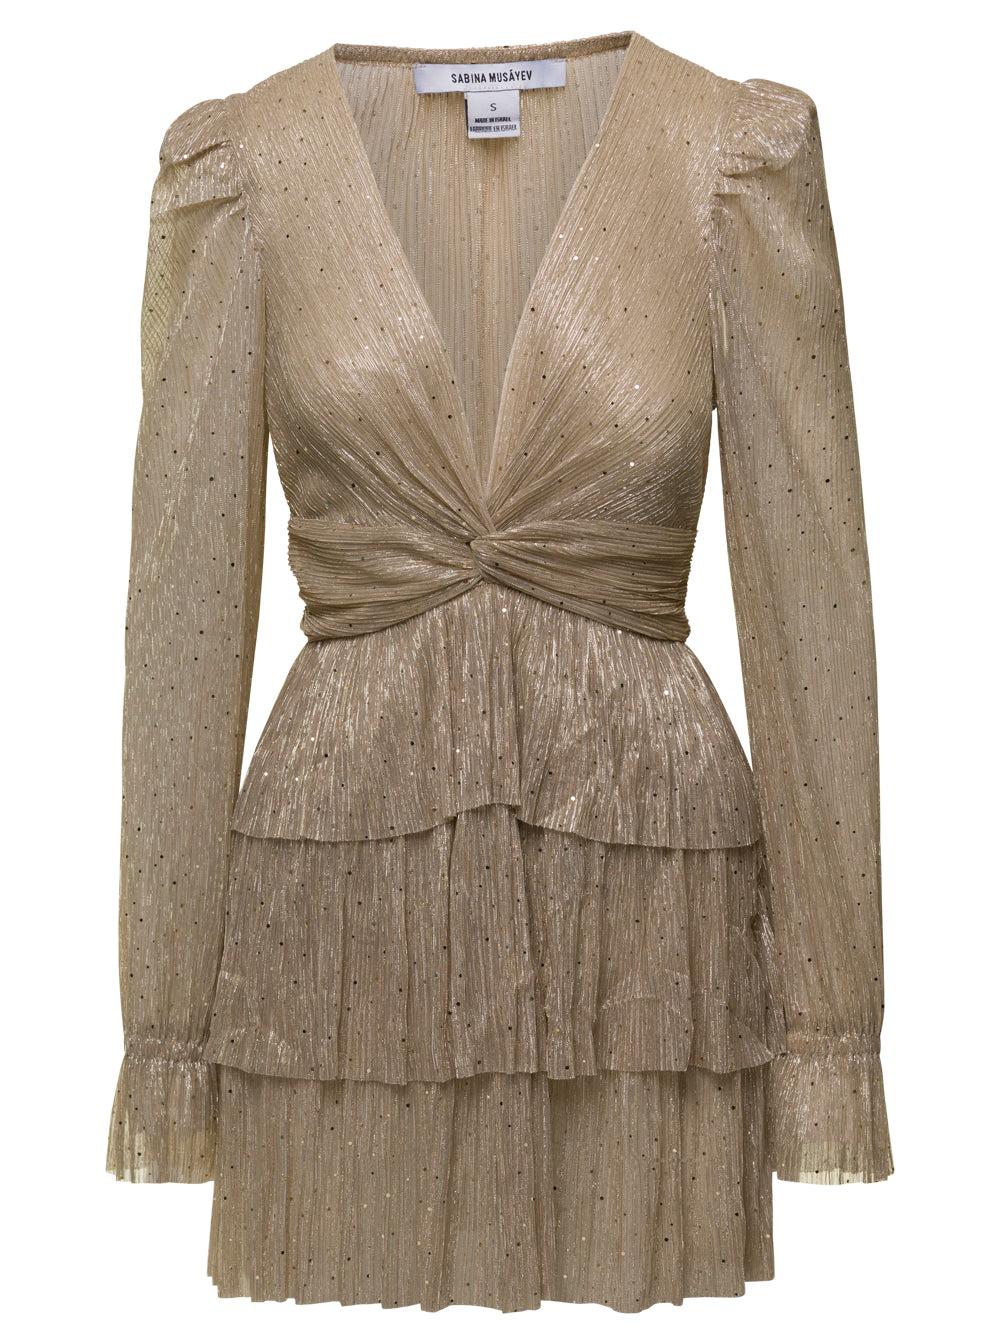 Sabina Musayev Paillettes Voile Mini Dress in Natural | Lyst